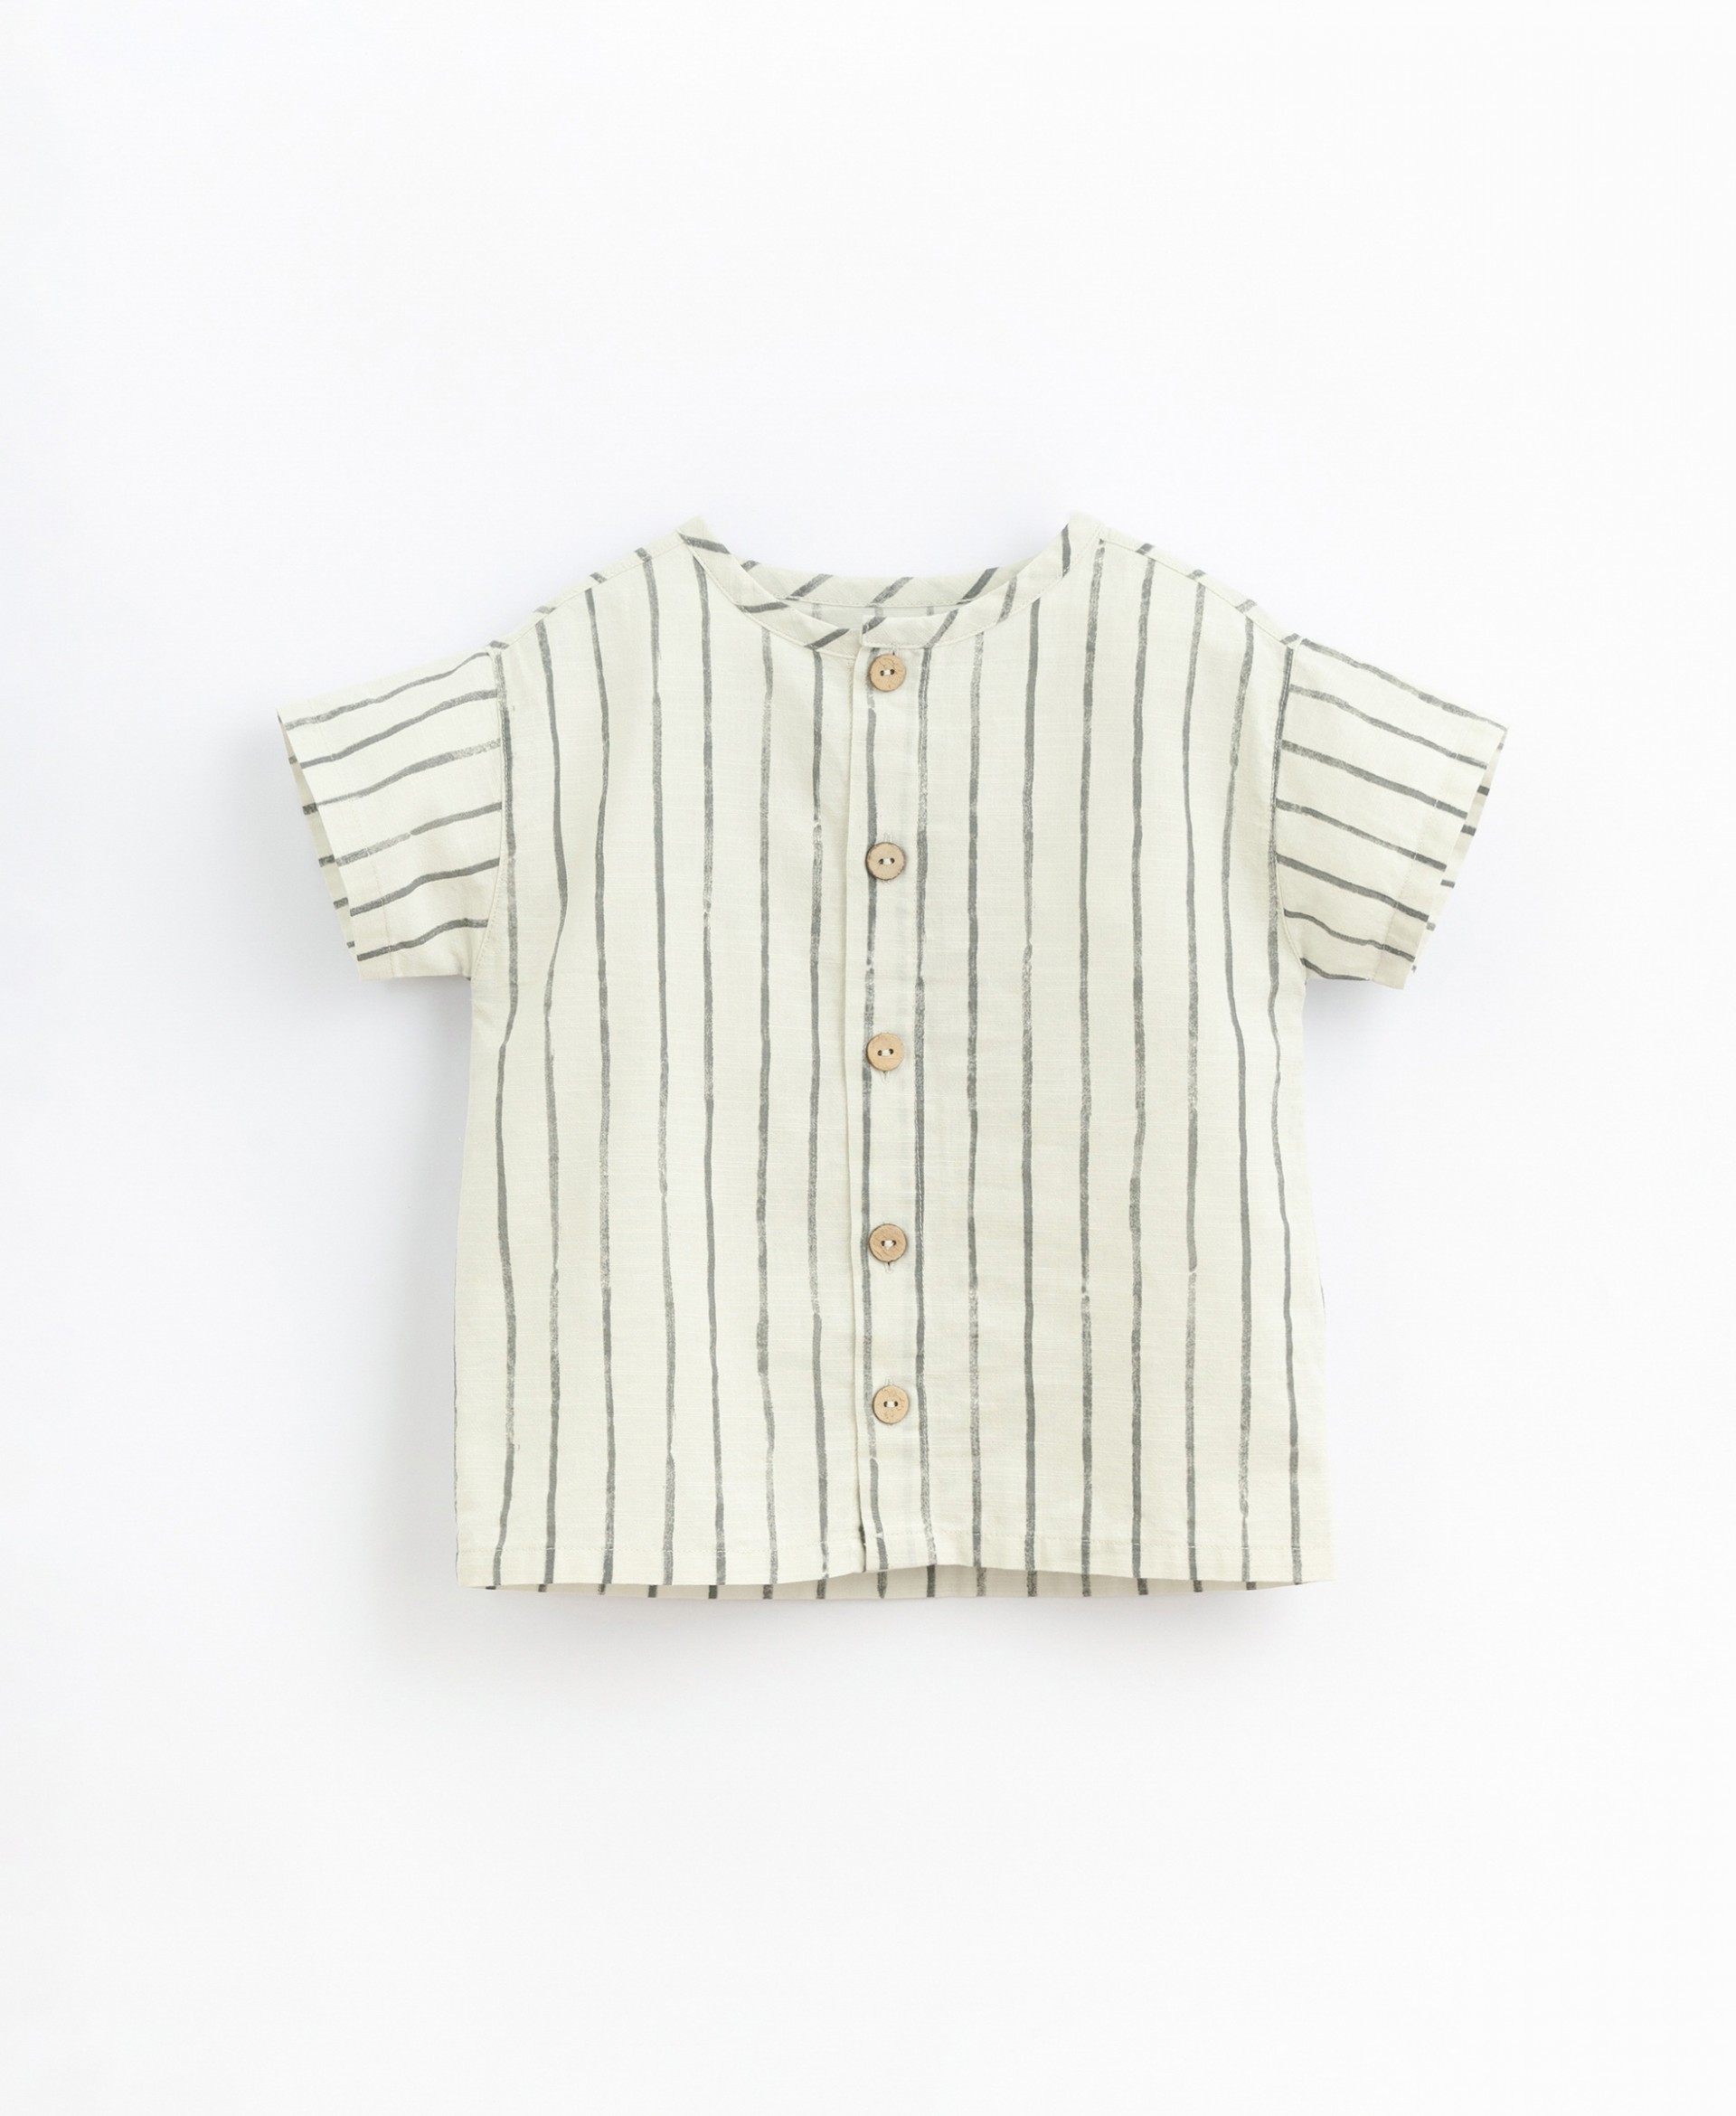 Shirt in blend of natural fibers | Basketry